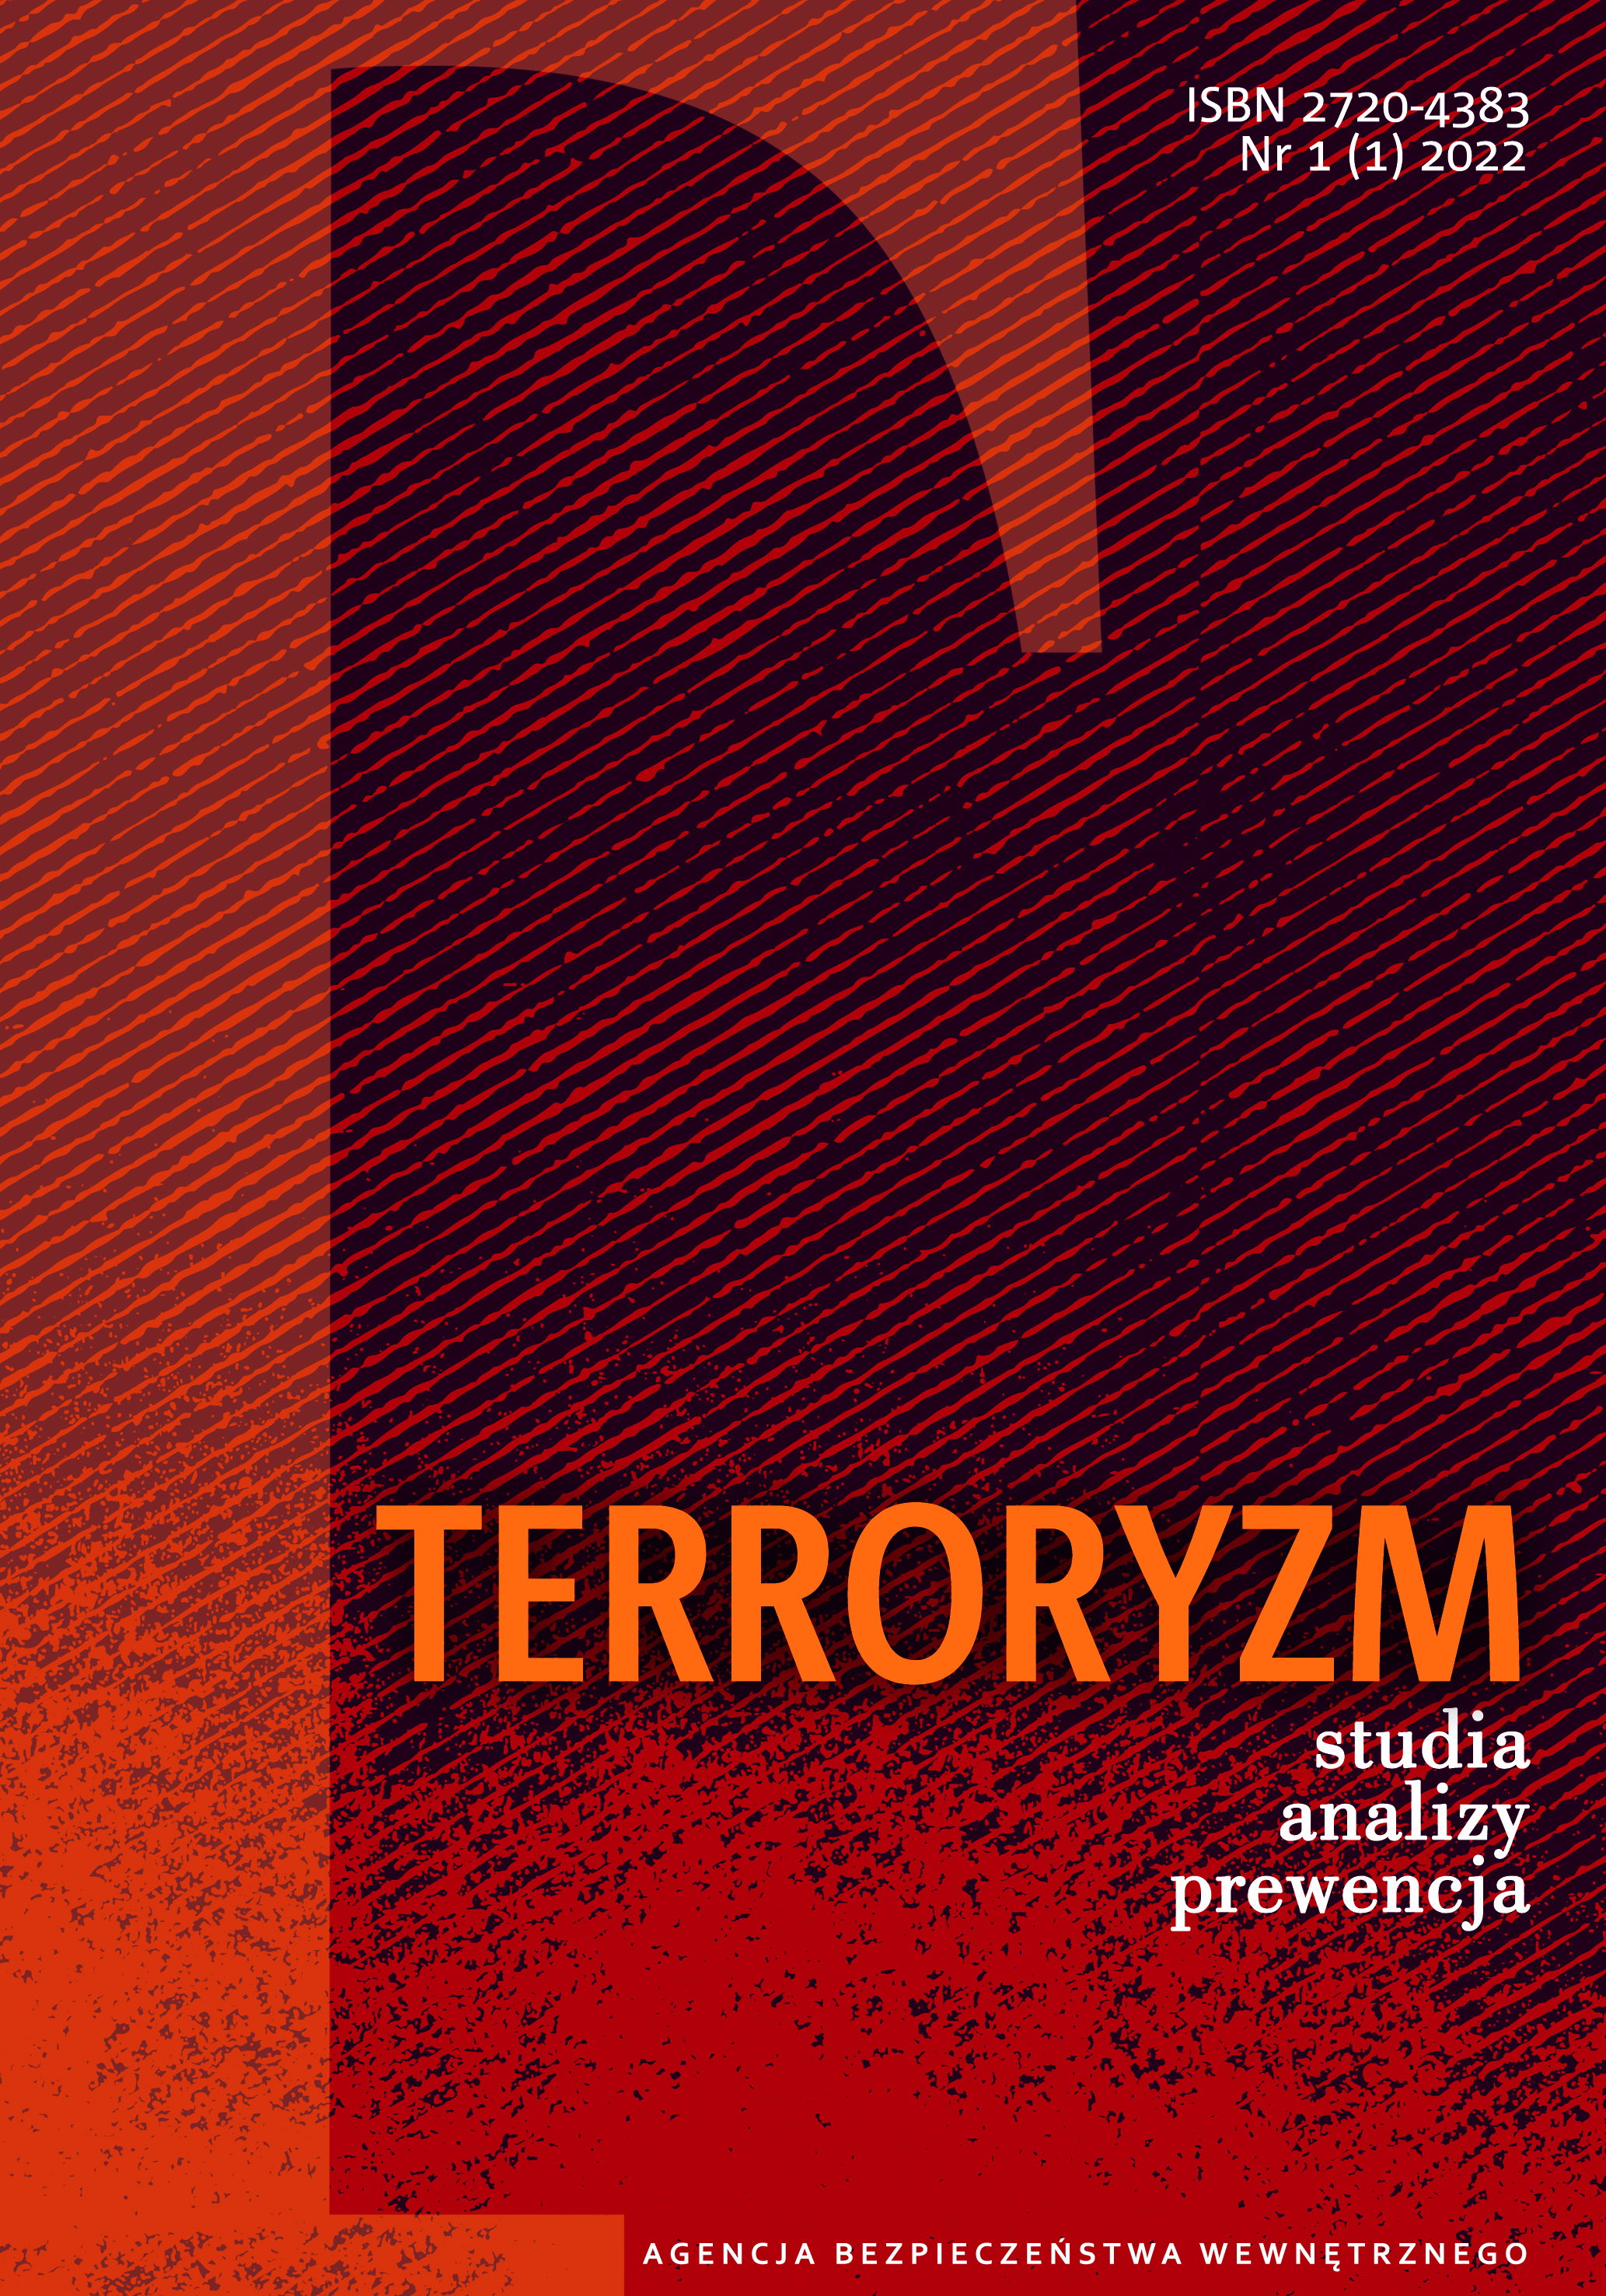 Tasks and powers of criminal law enforcement authorities in combating terrorism in Poland - a legal perspective Cover Image